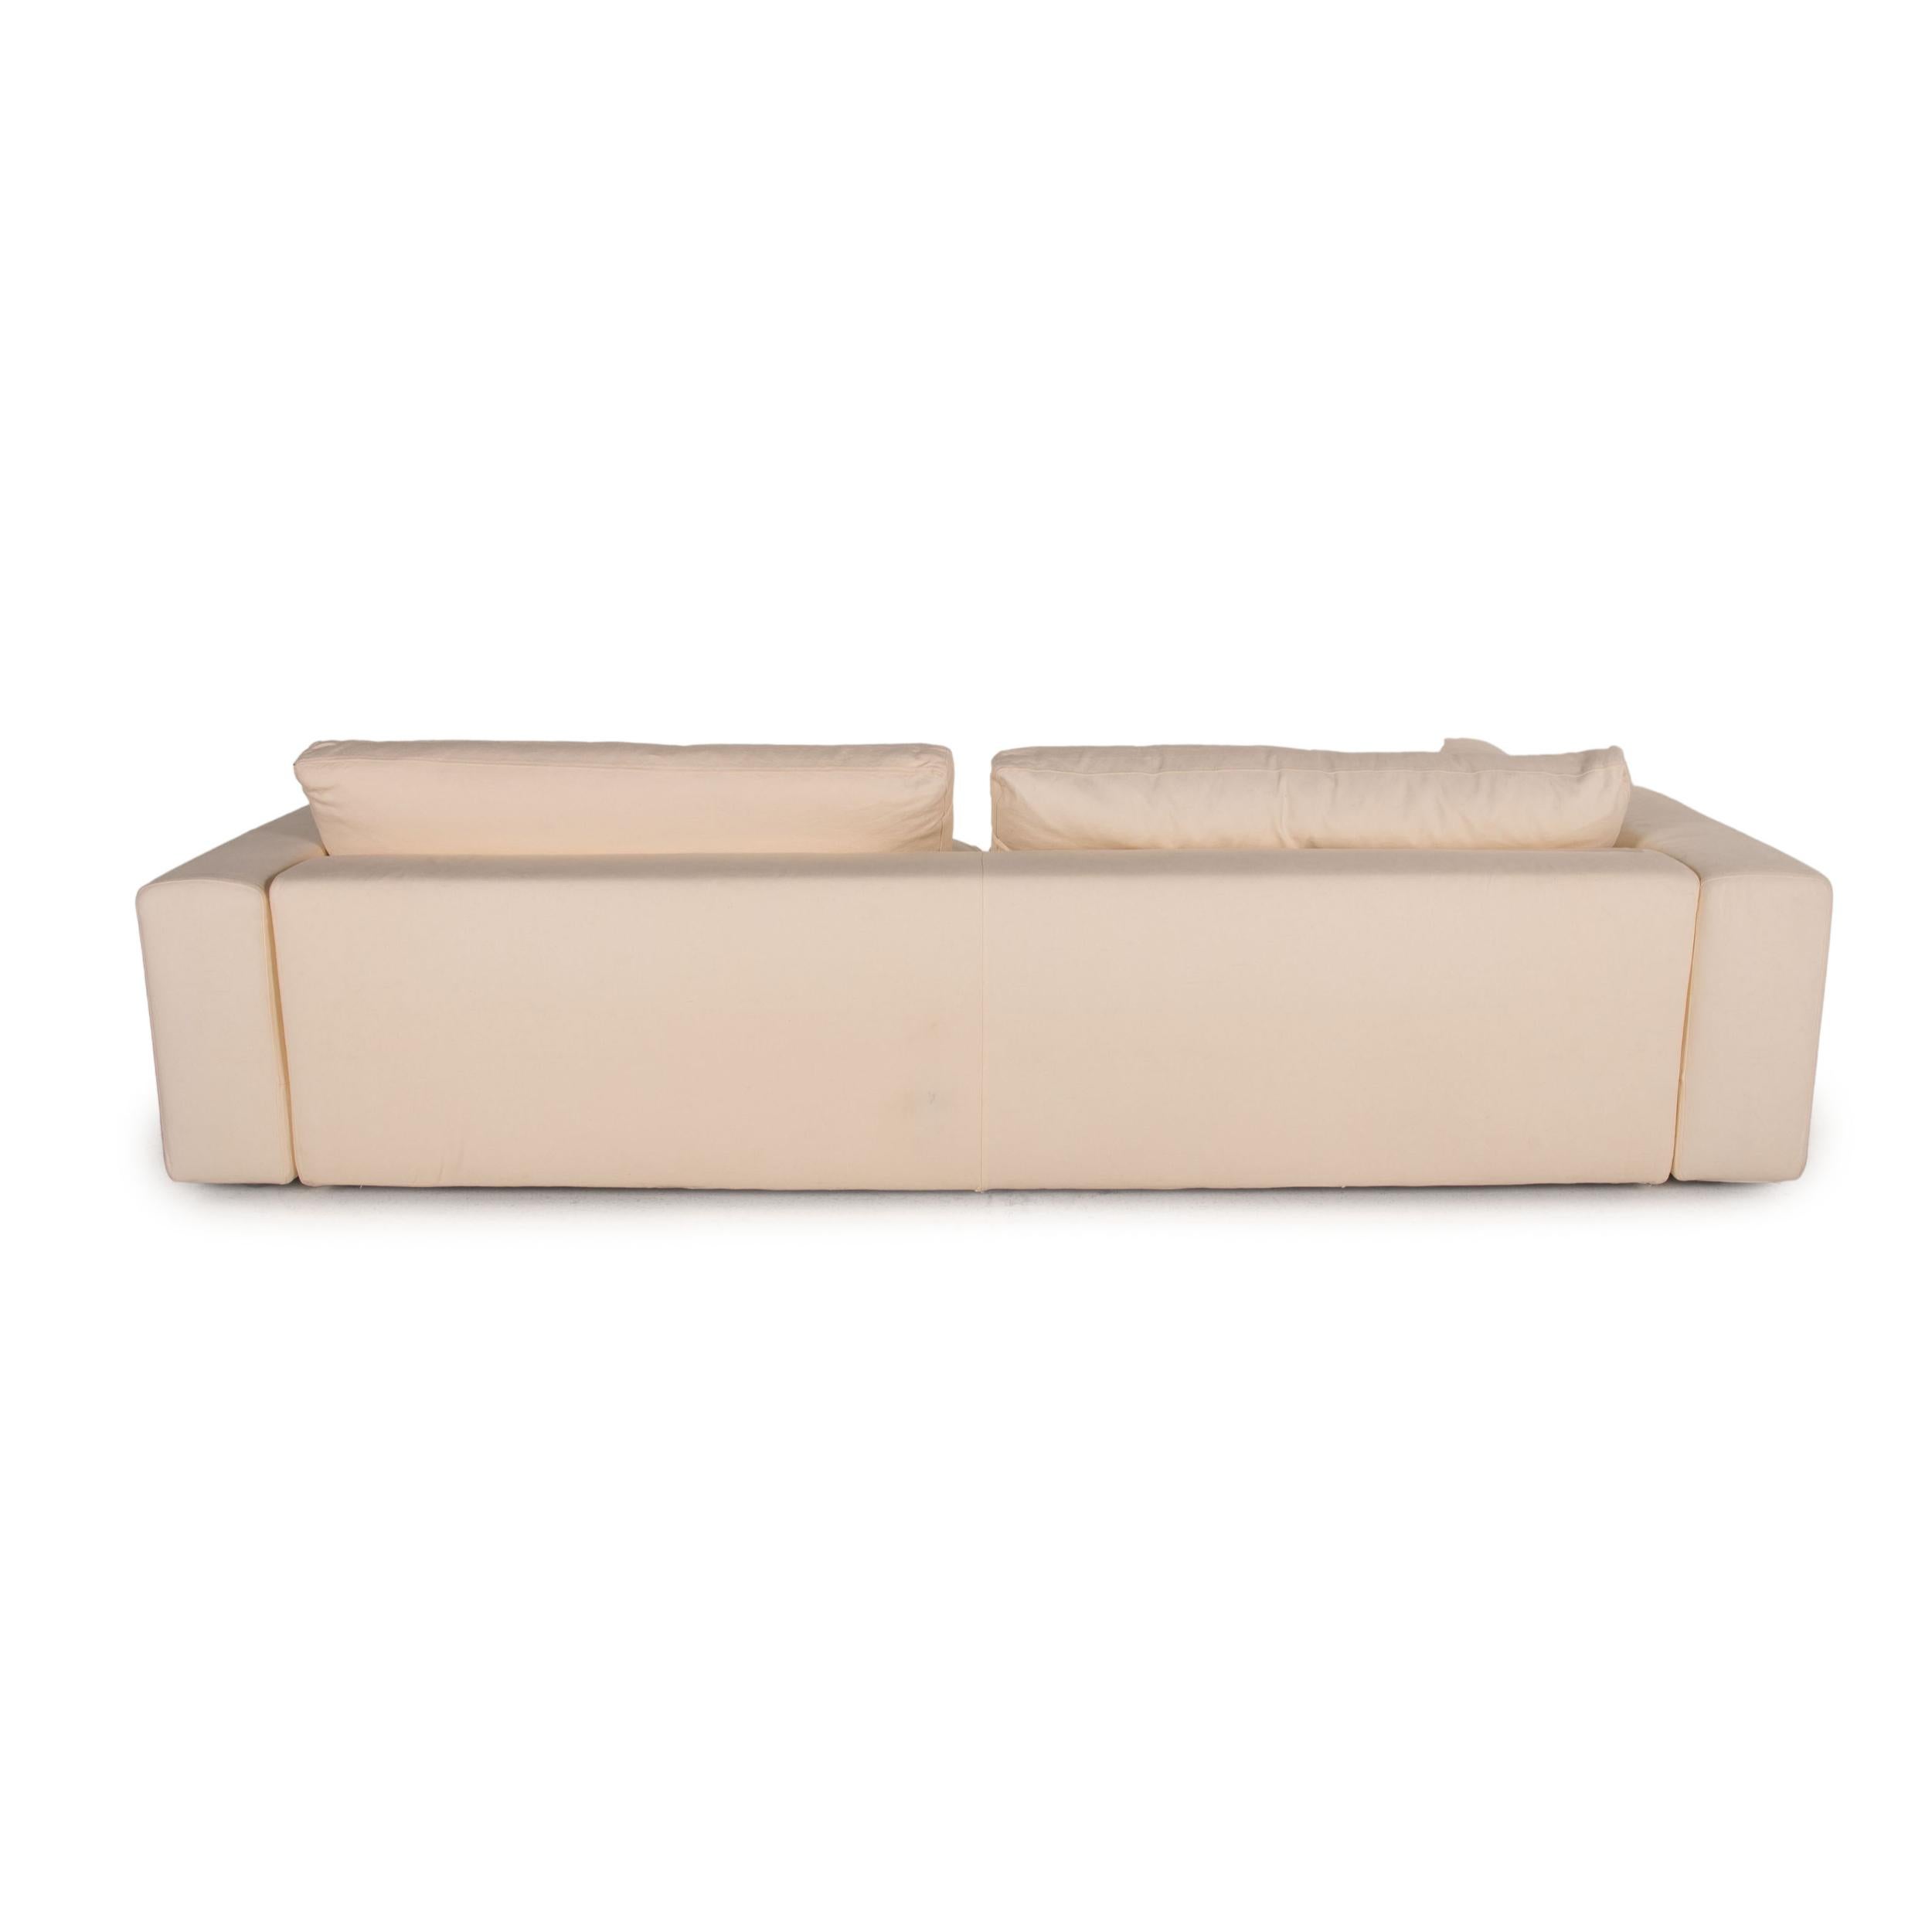 Who's Perfect Summer Fabric Sofa Cream Four Seater Couch 1